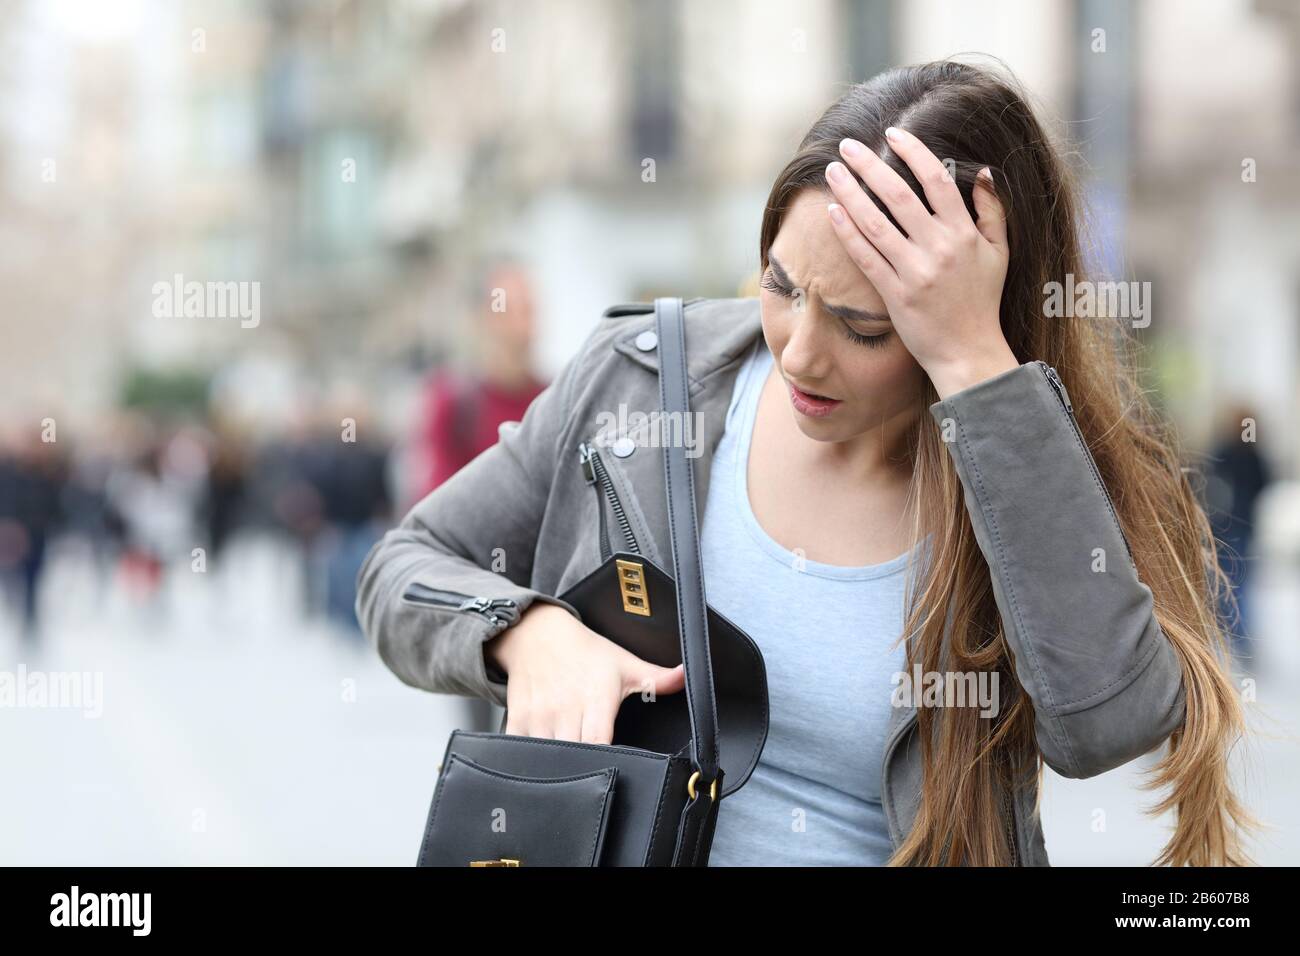 Front view of a worried woman looking preoccupied inside her bag on a city street Stock Photo